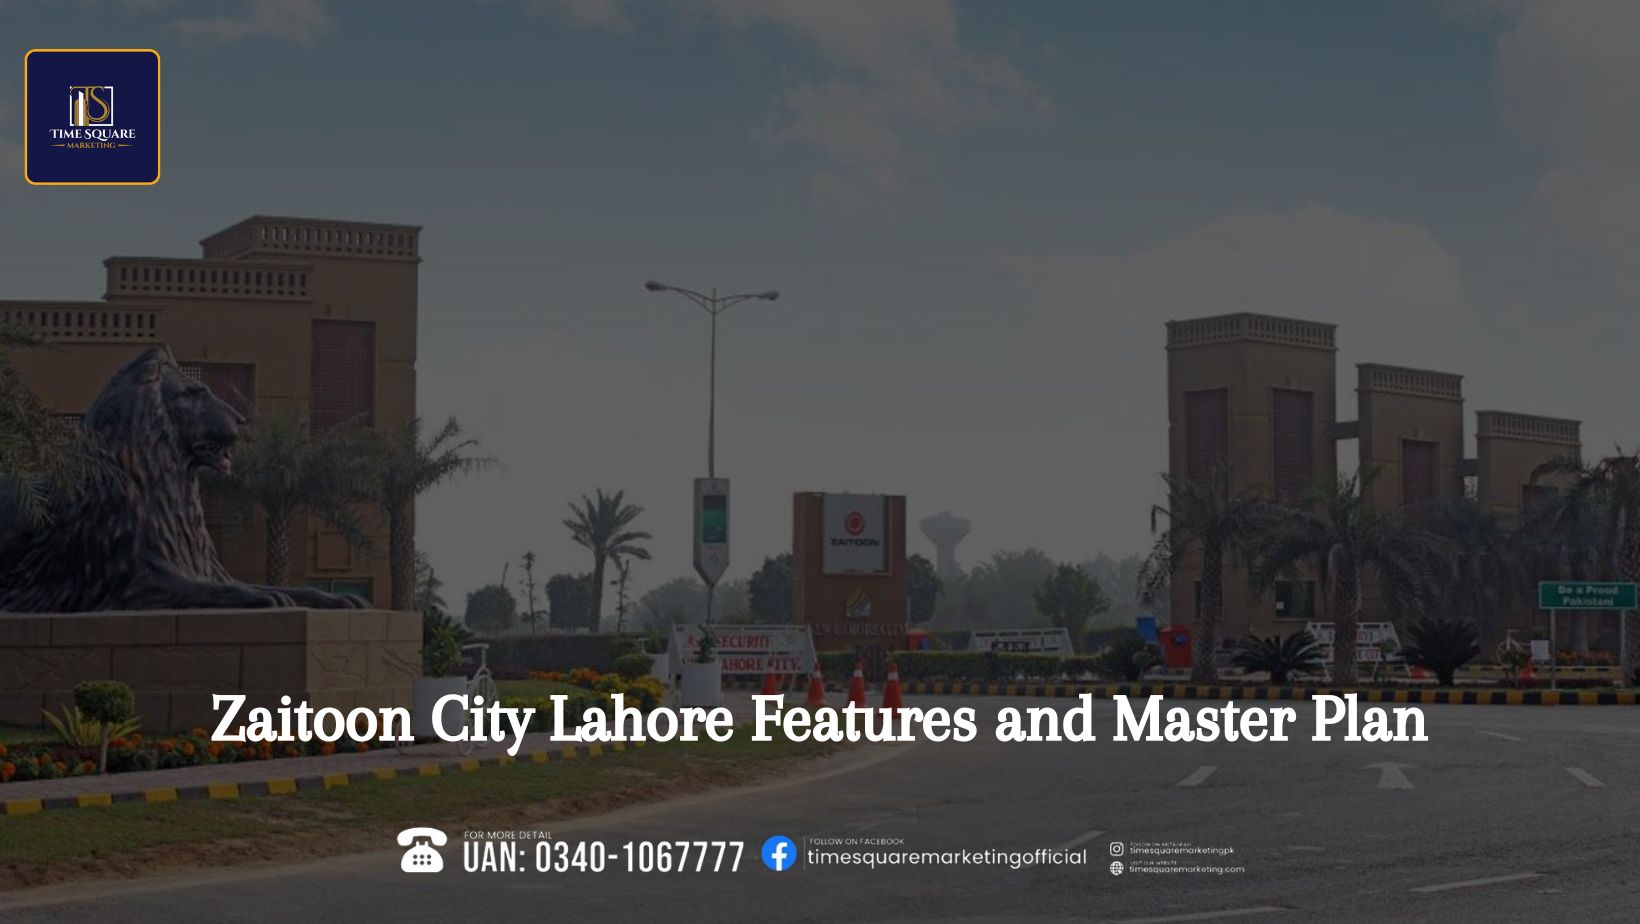 Zaitoon City Lahore Features and Master Plan